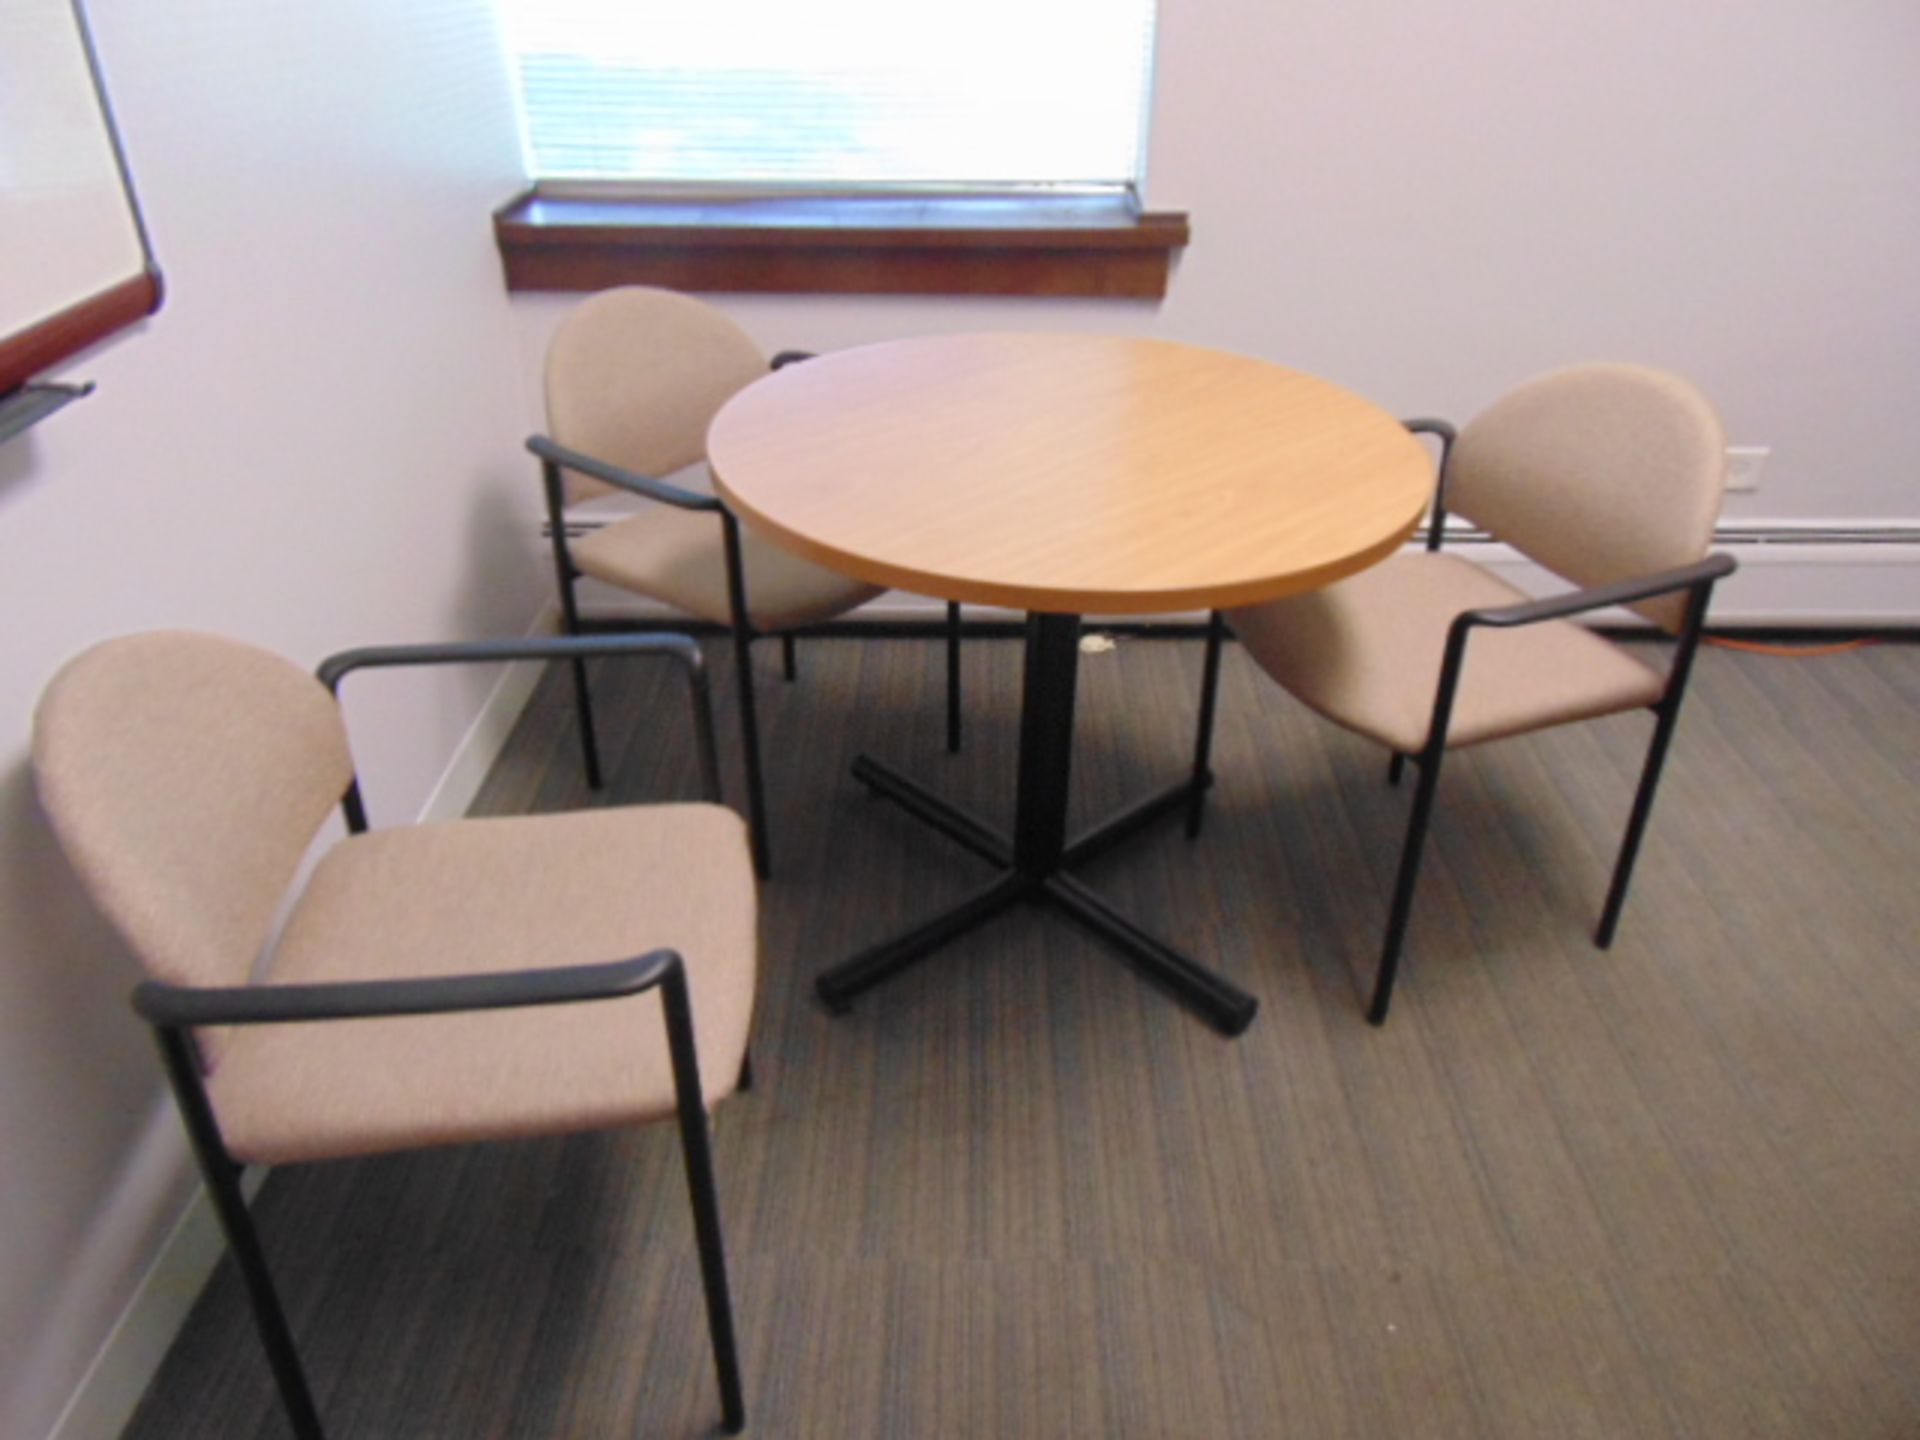 LOT CONSISTING OF: L-shaped desk, table, printer, ornamental plant, white board & (6) chairs - Image 5 of 6